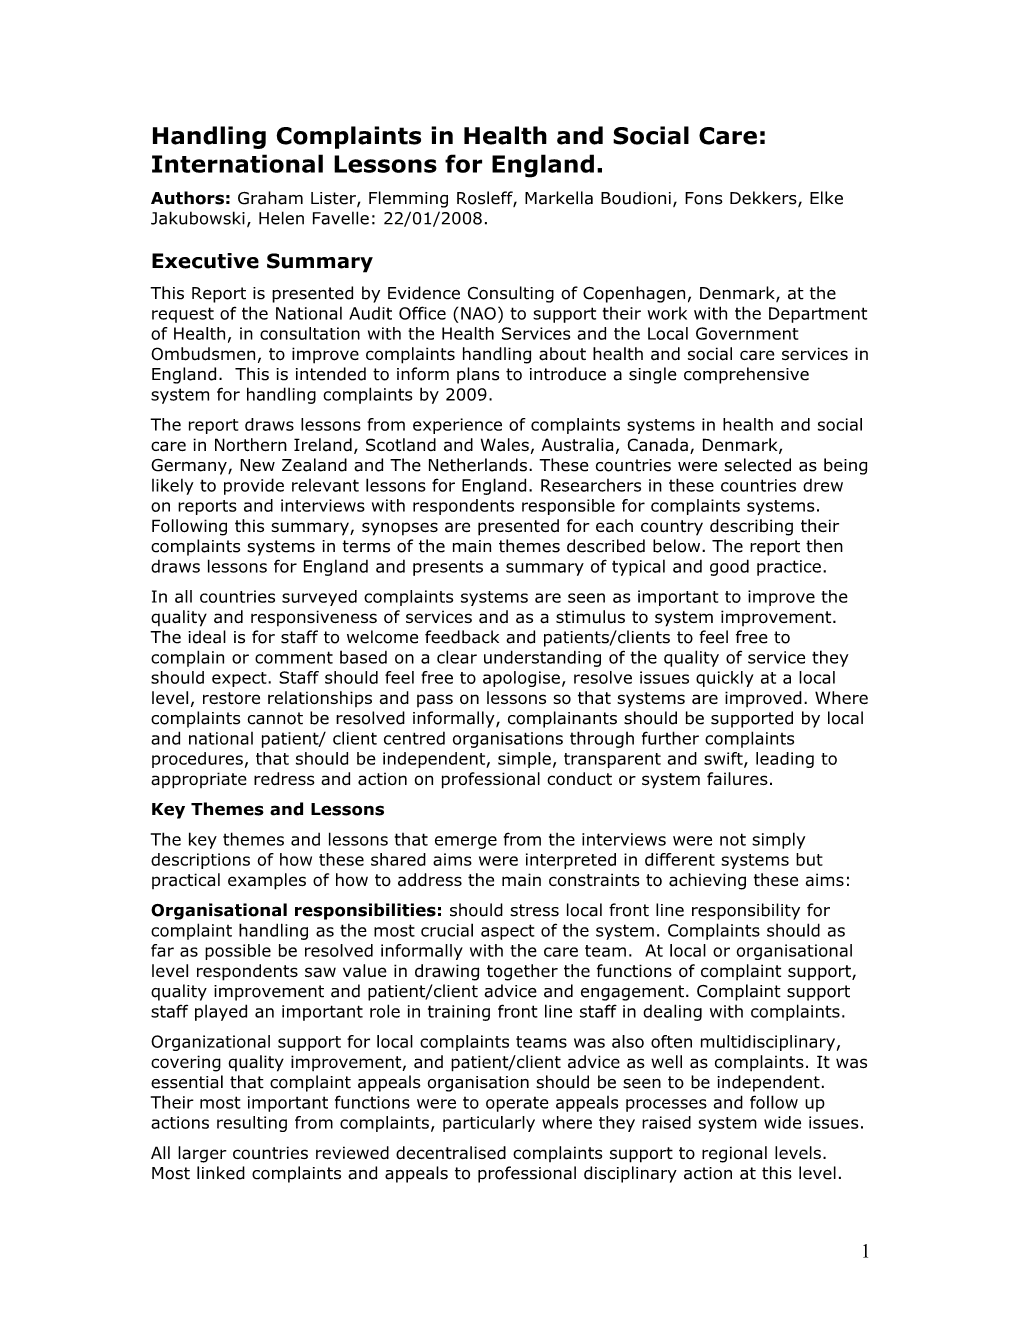 Handling Complaints in Health and Social Care: International Lessons